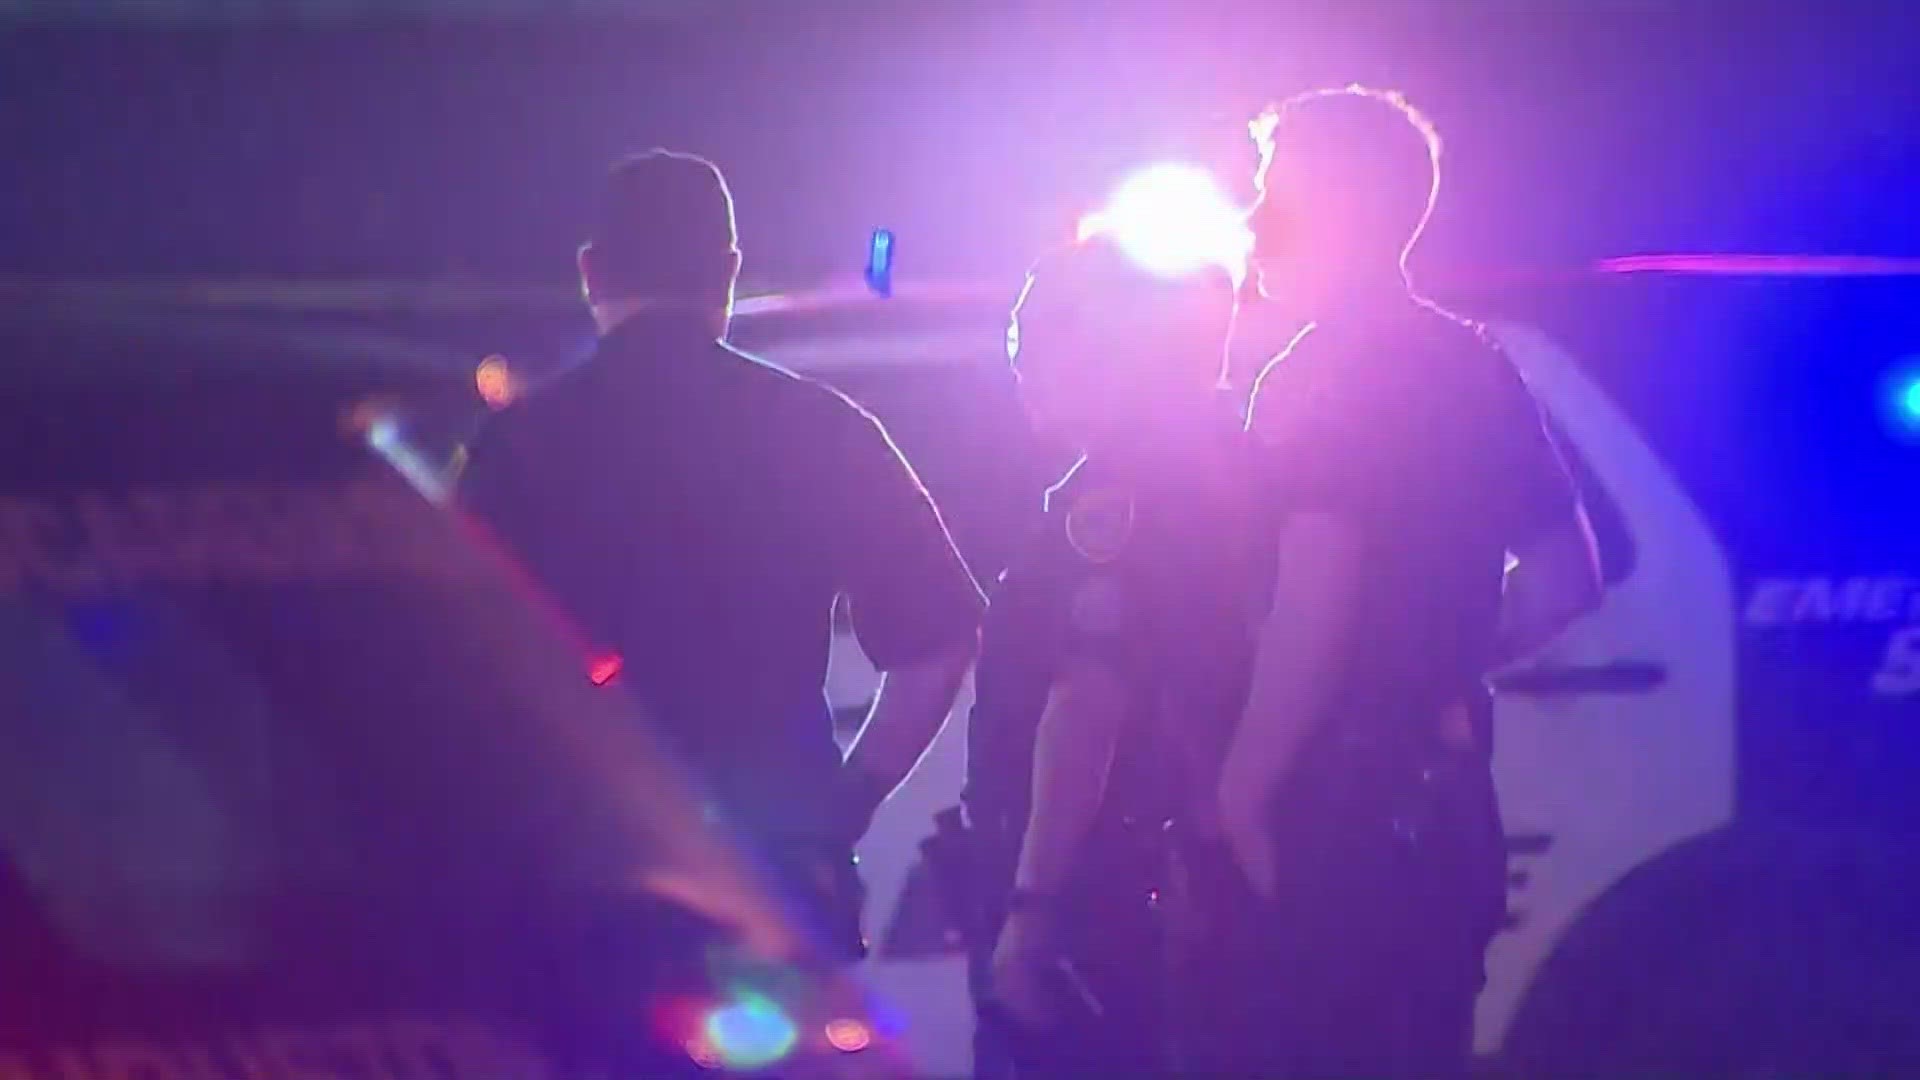 A 2-year-old boy was hit and killed by a car in west Houston Sunday night, police said.